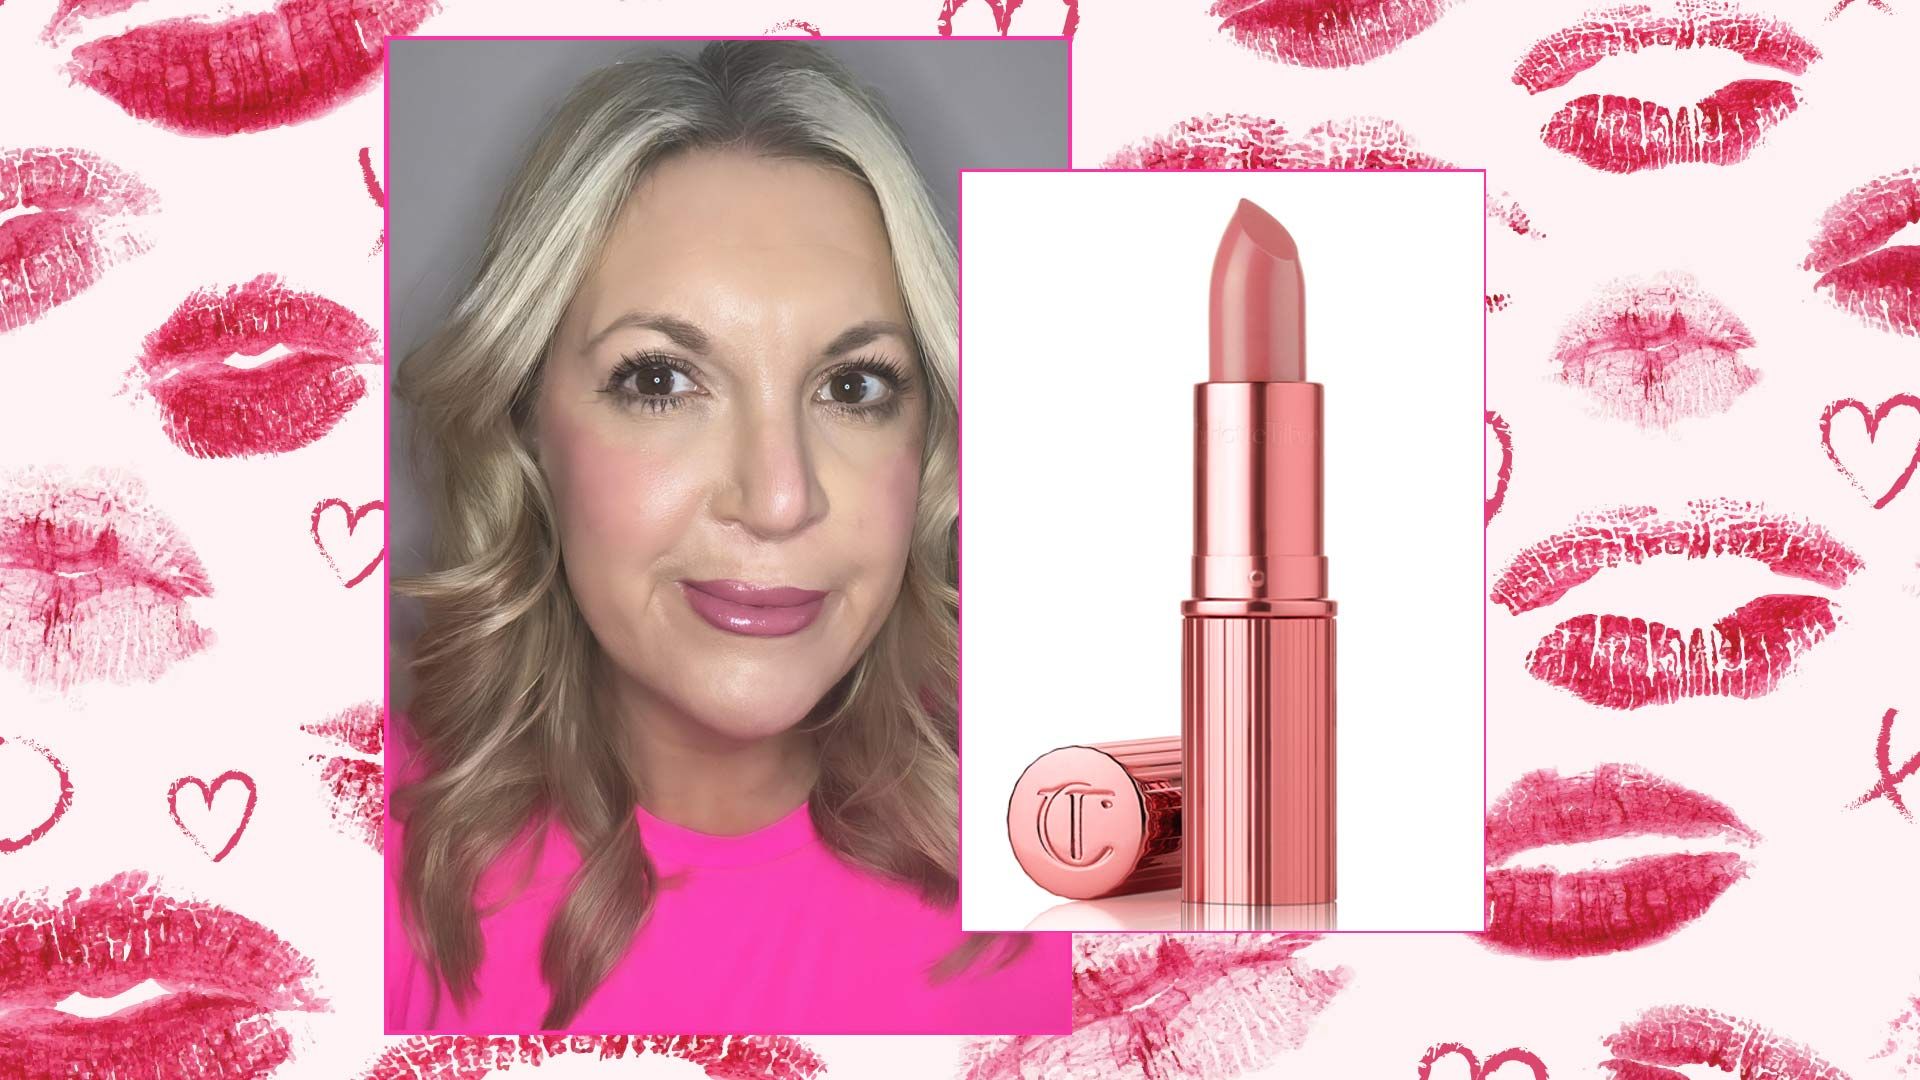 Leanne Bayley wearing Candy Chic pink lipstick by Charlotte Tilbury